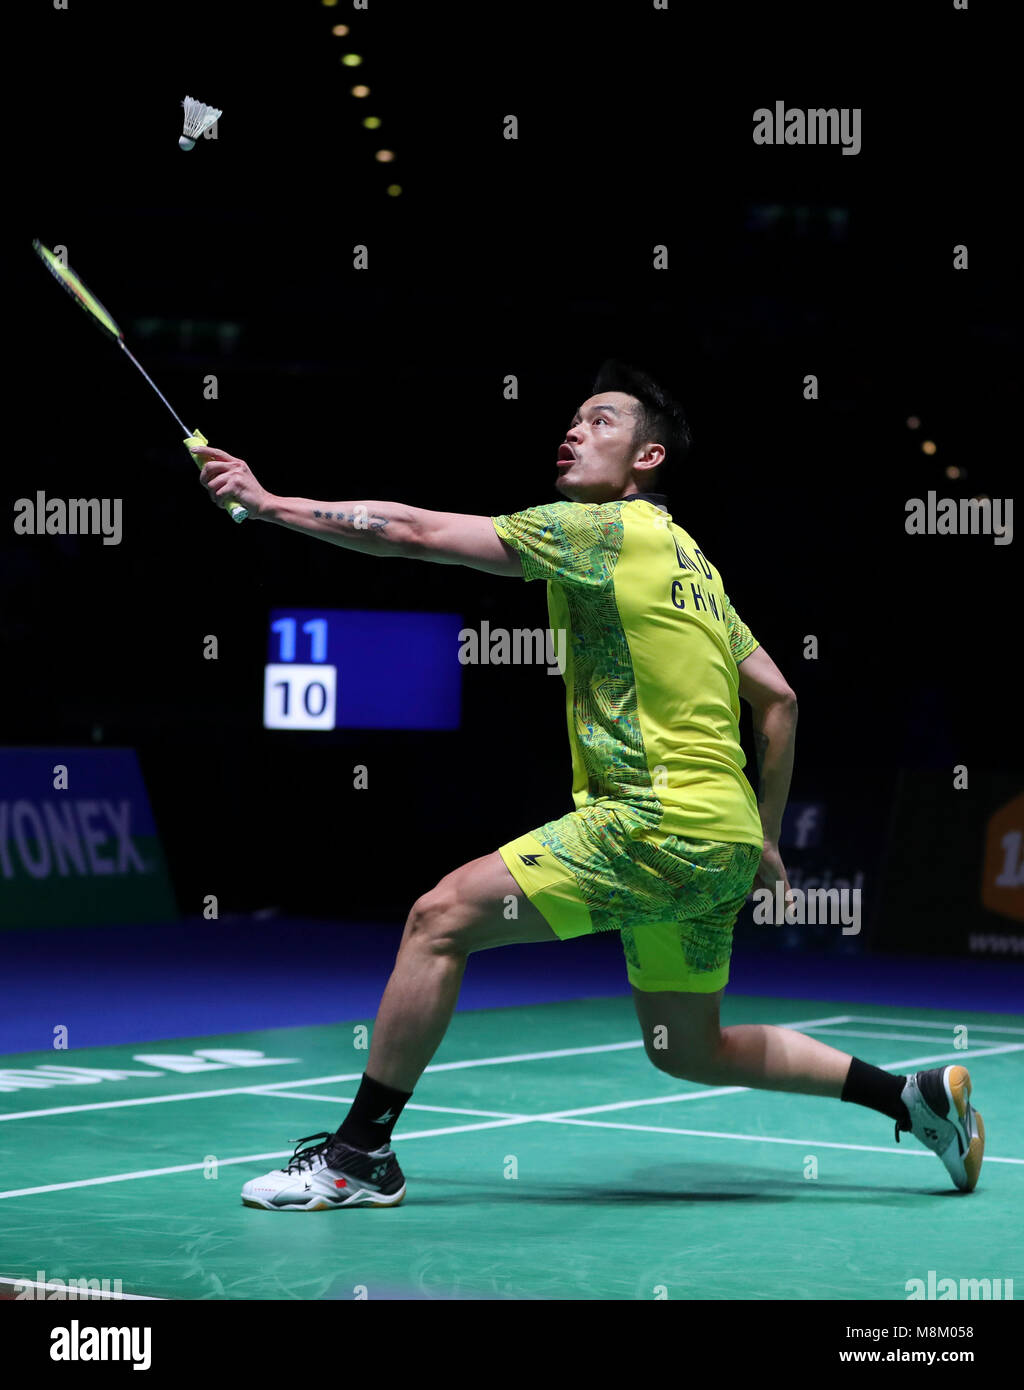 Birmingham. 18th Mar, 2018. Lin Dan of China returns the shot during the men's singles final with his compatriot Shi Yuqi at All England Open Badminton Championships 2018 in Birmingham, Britain on March 18, 2018. Credit: Han Yan/Xinhua/Alamy Live News Stock Photo